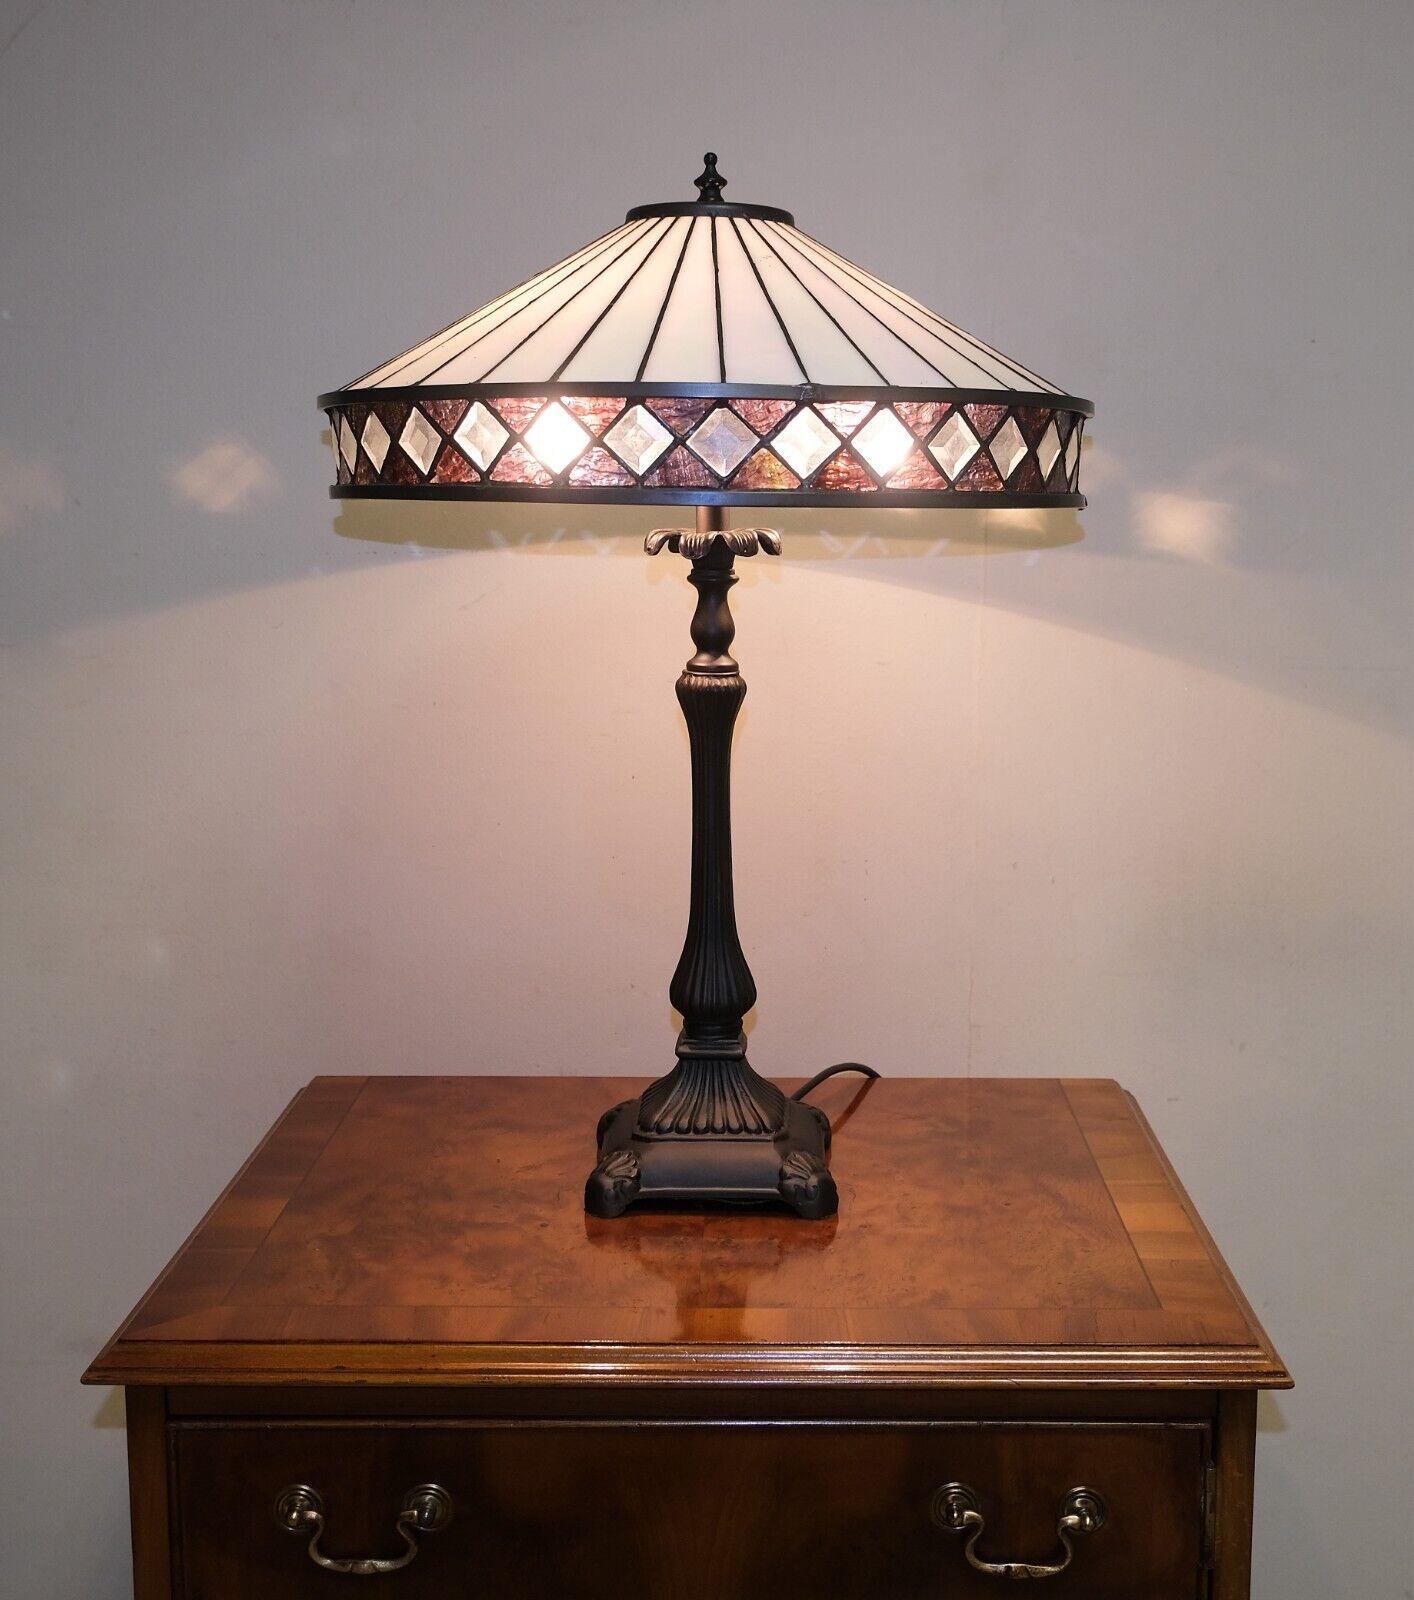 We are delighted to offer for sale this lovely Fargo Tiffany style art deco medium table lamp on bronze stand. 

This stylish, well  made and lovely table lamp features clean lines, subtle colour and uniform symmetry at the top of the shade, along